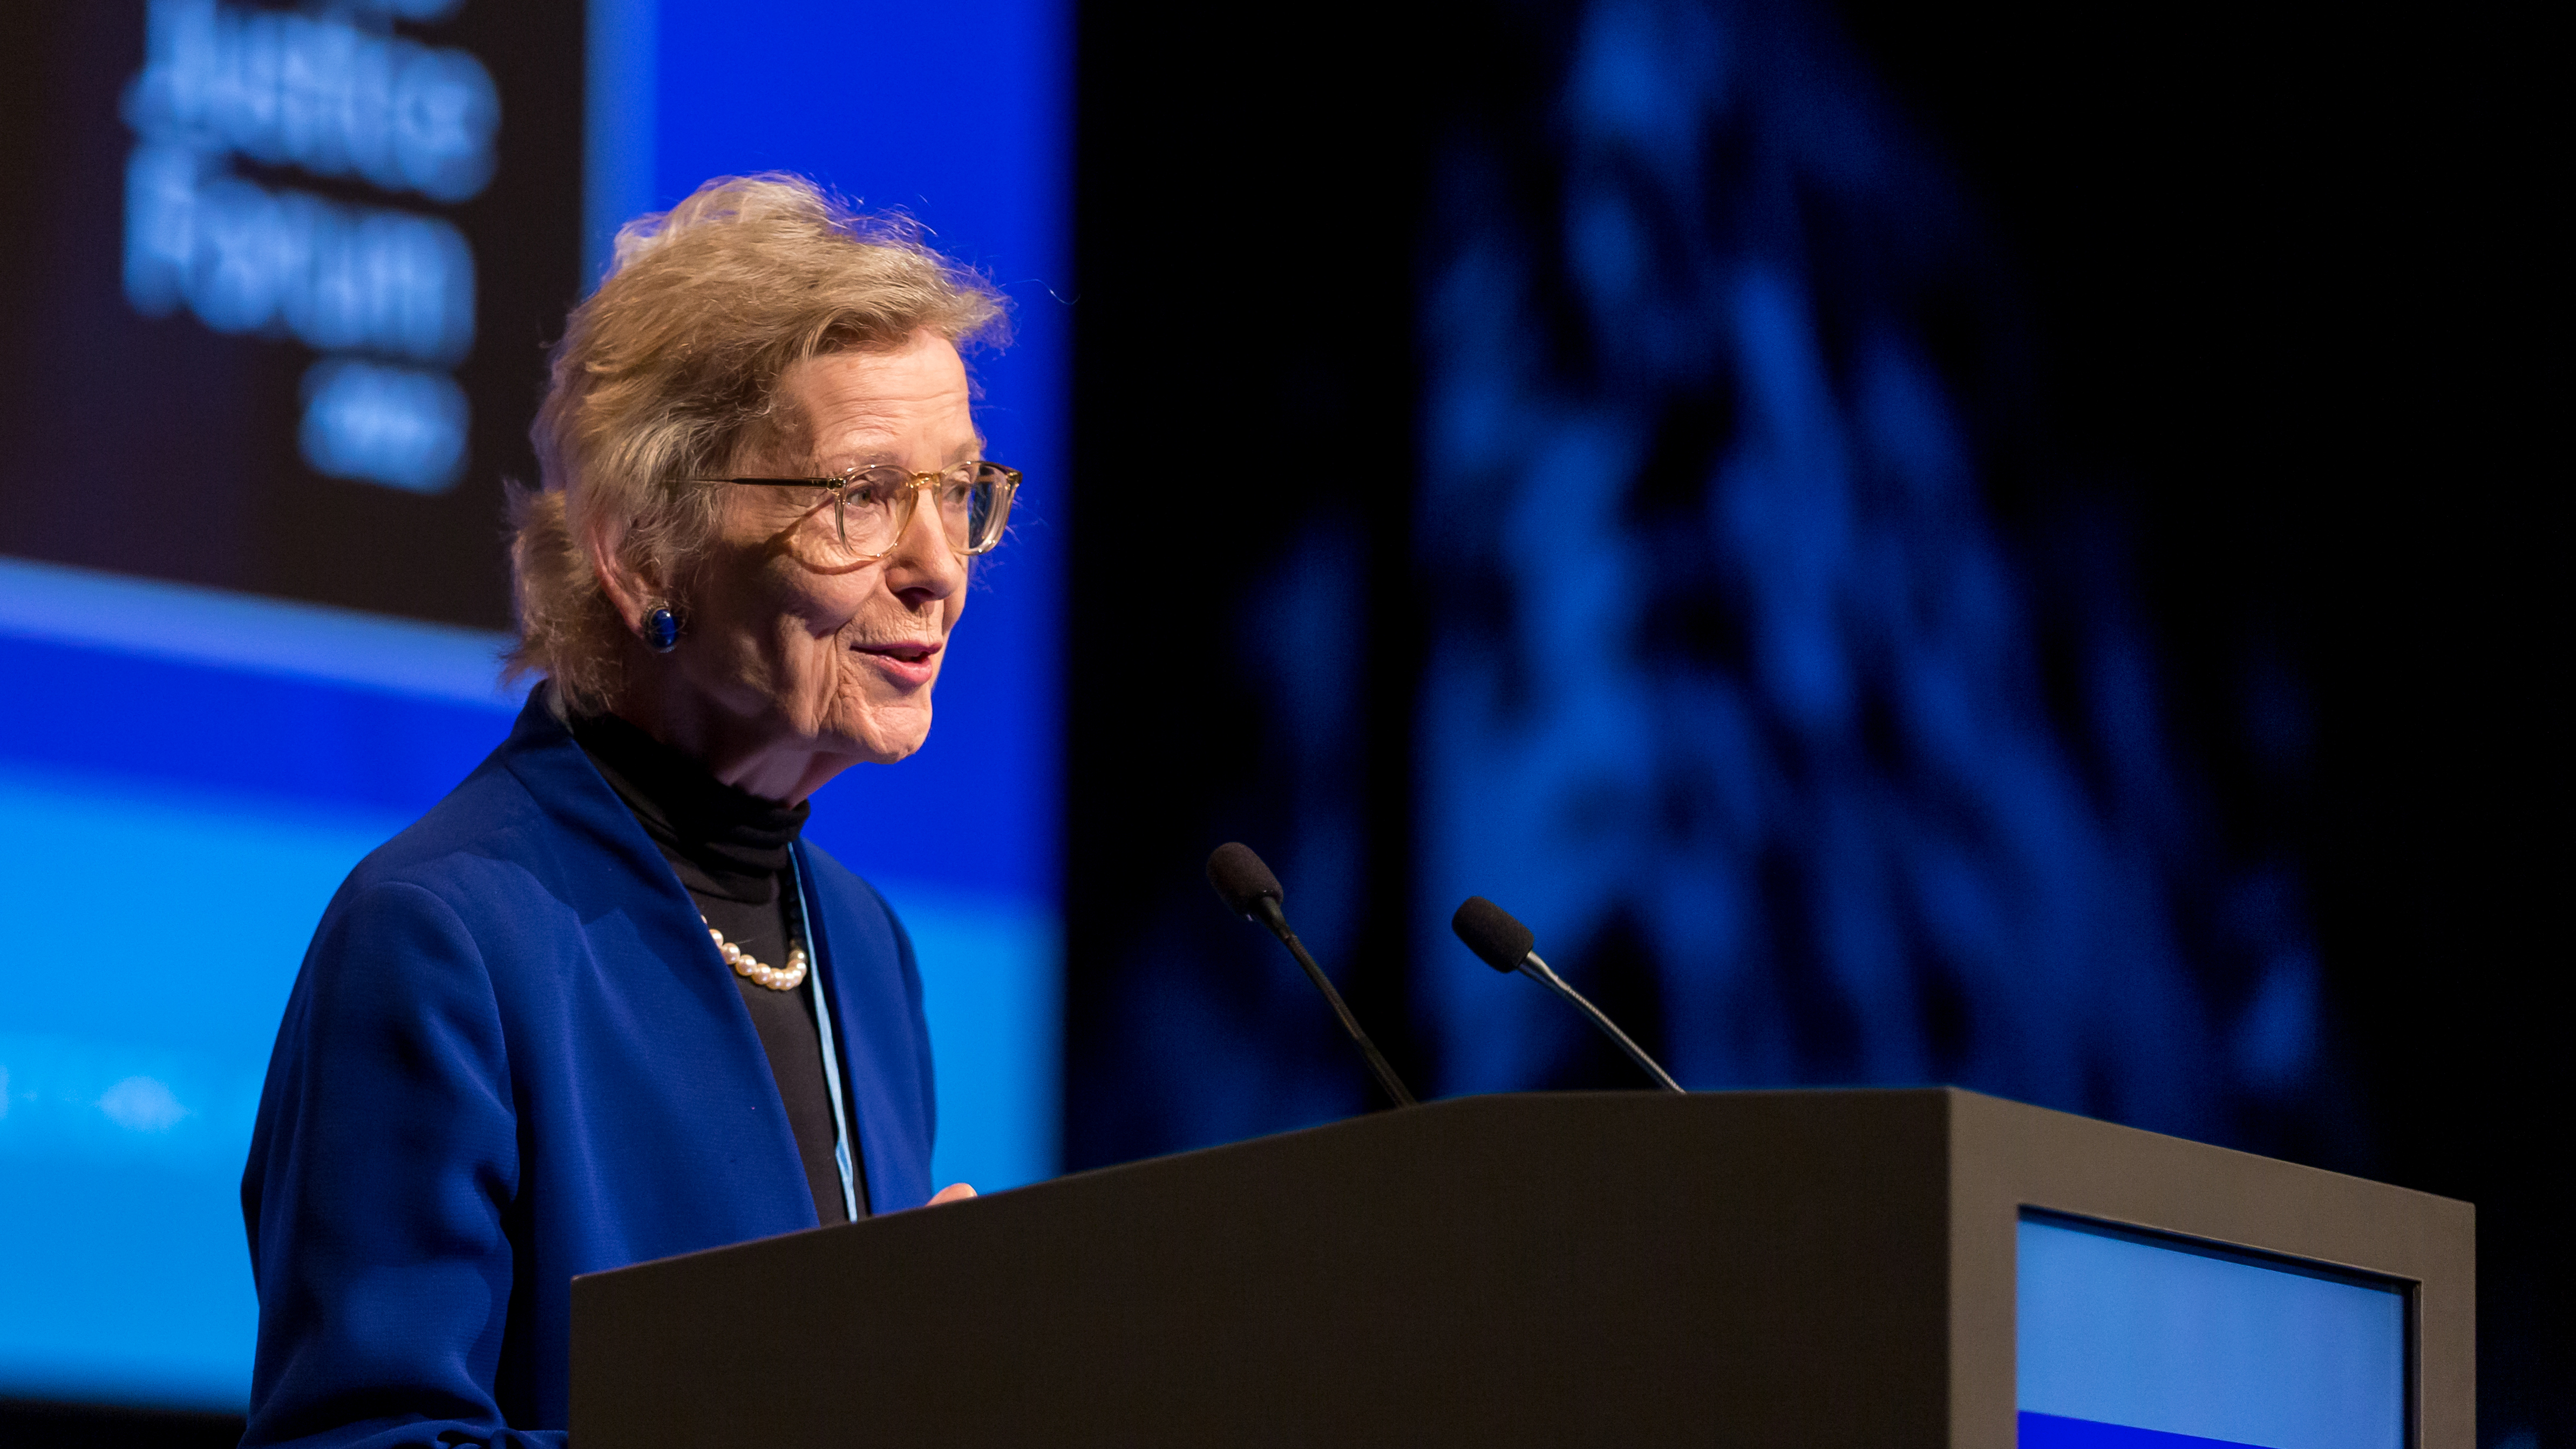 Chair of the Elders and Former President of Ireland Mary Robinson giving remarks during the Closing Plenary.